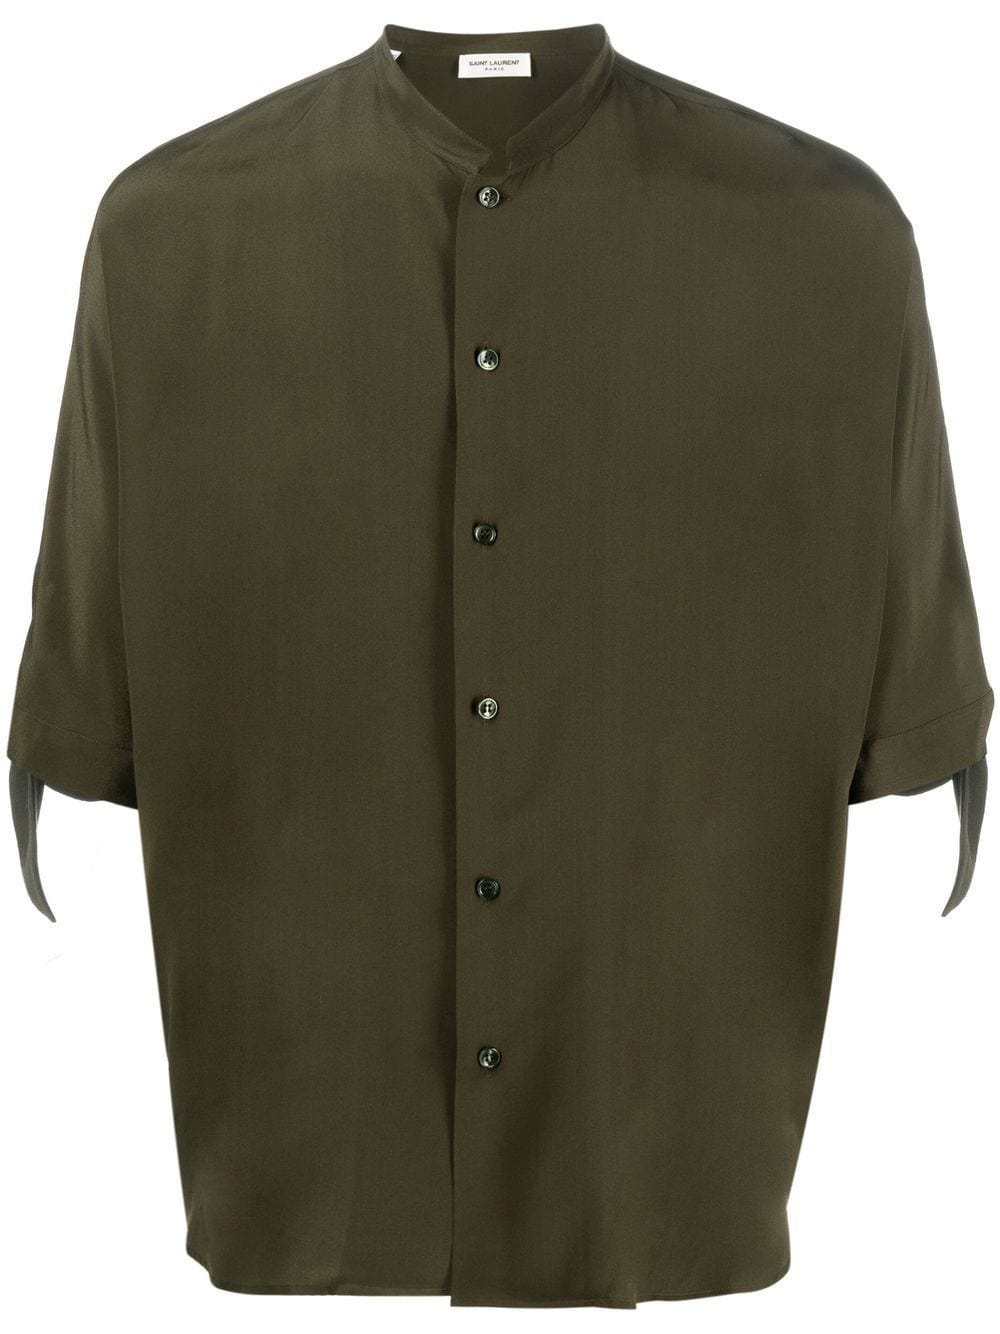 SAINT LAURENT GREEN SHIRT WITH SLEEVES WITH BOWS